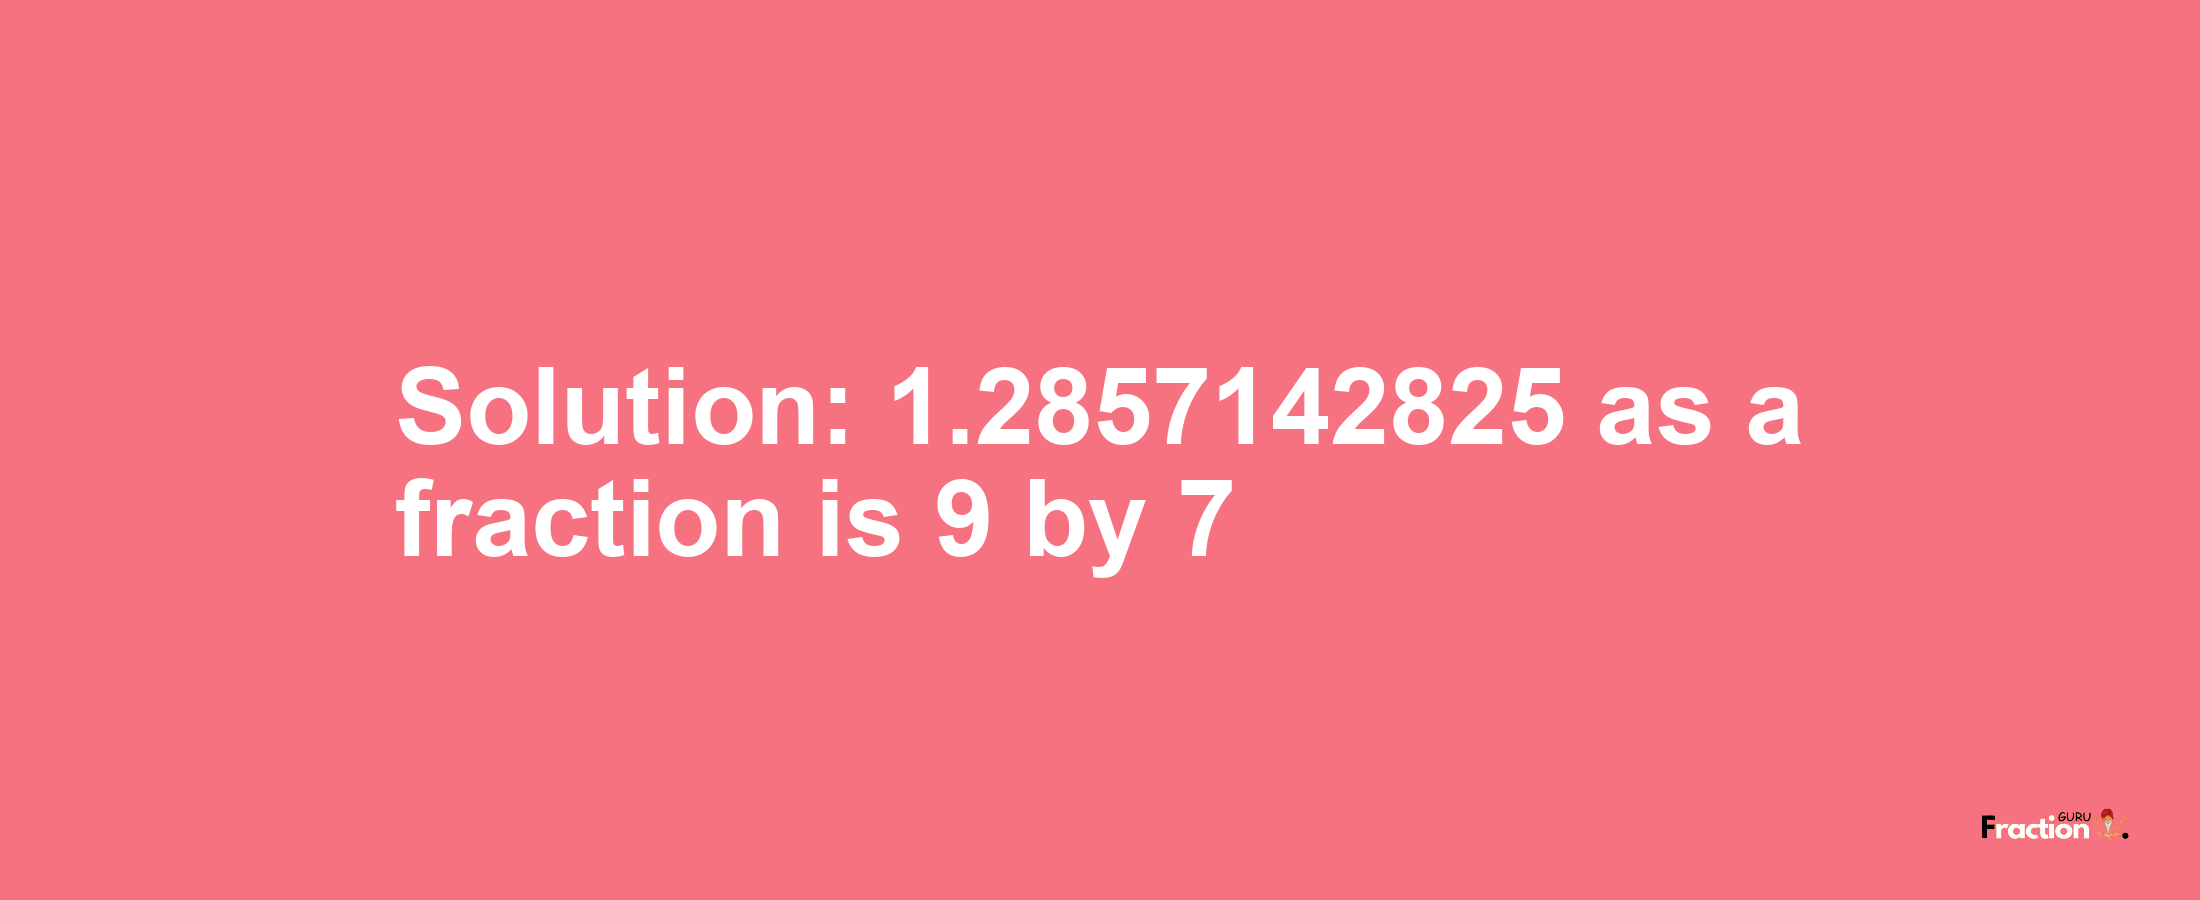 Solution:1.2857142825 as a fraction is 9/7